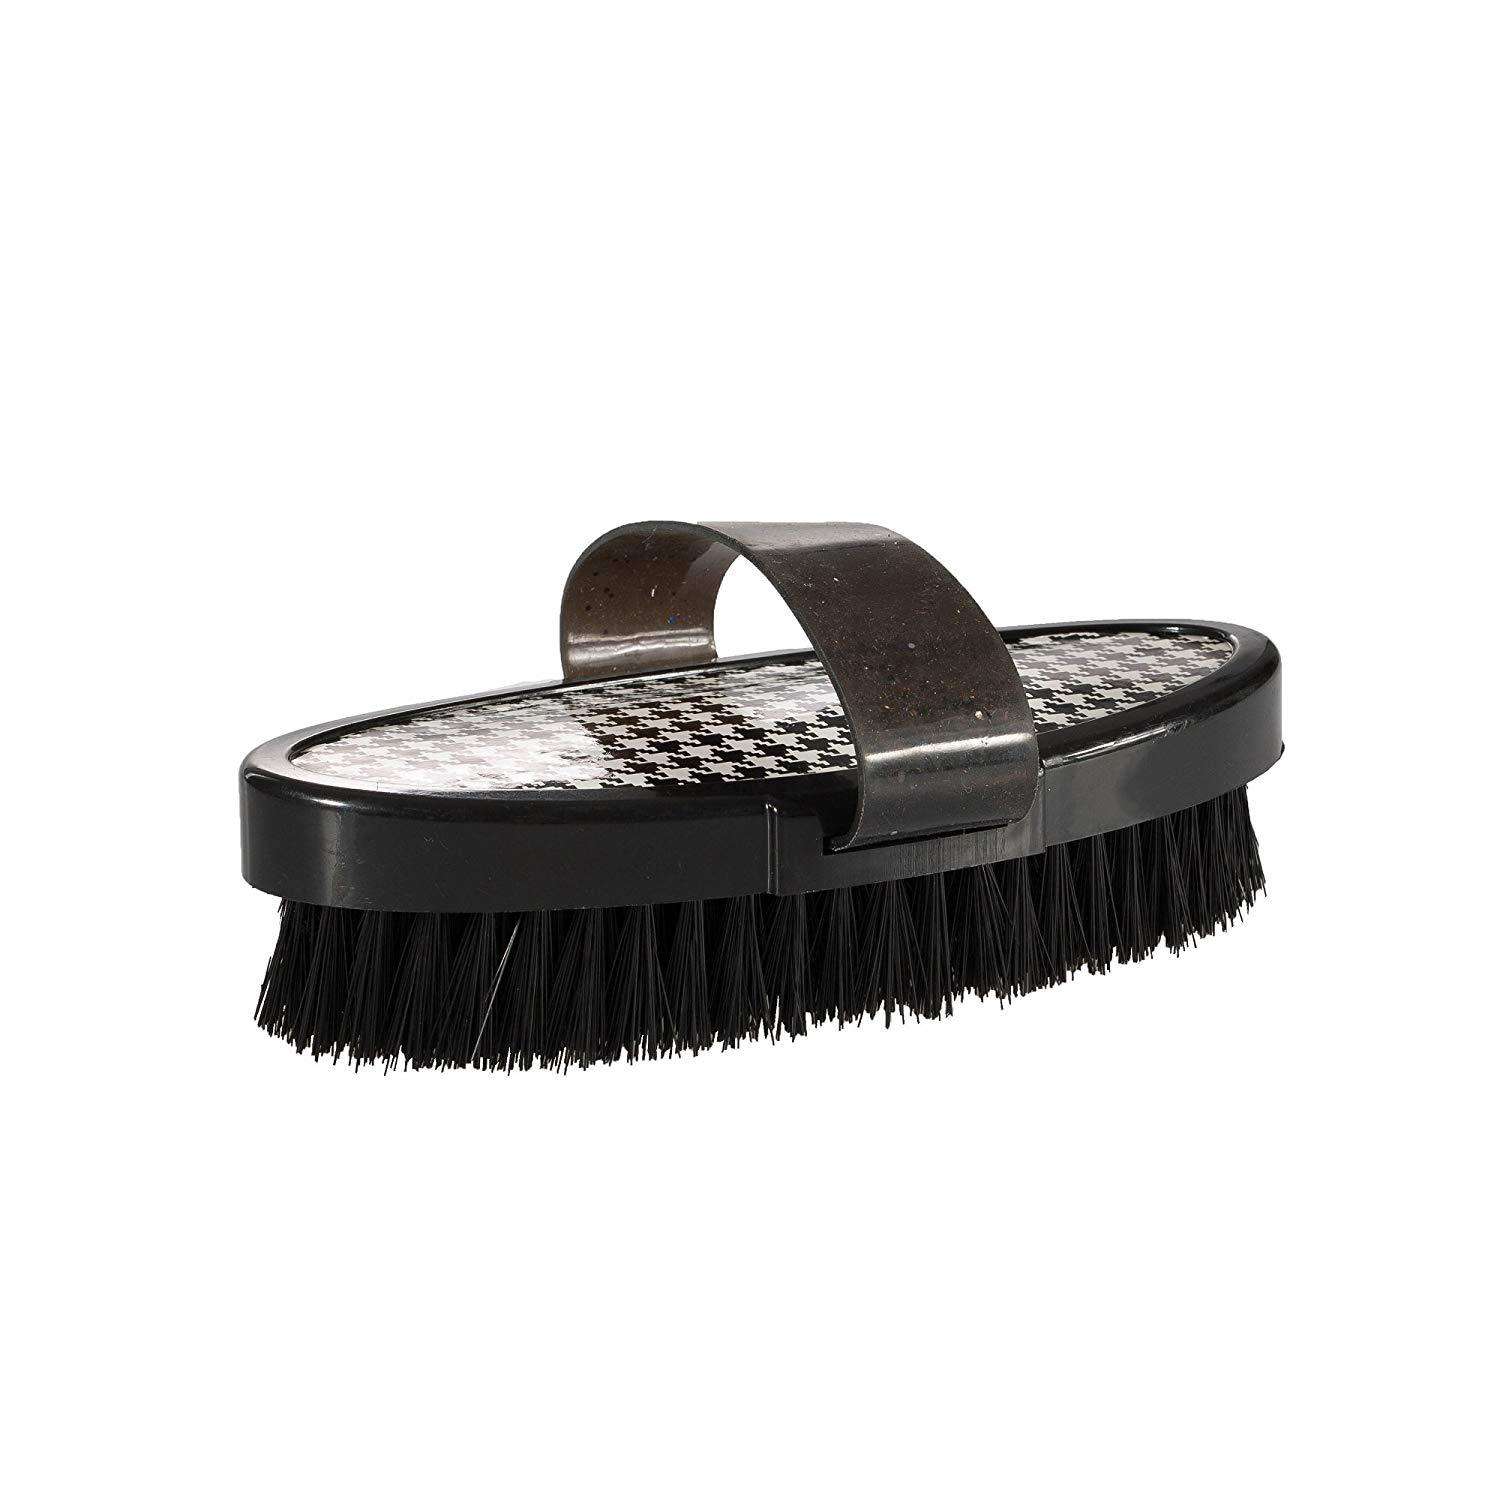 Equi-Essentials Wood Backed Horsehair Dandy Brush Size:Small 6 Color:Natural